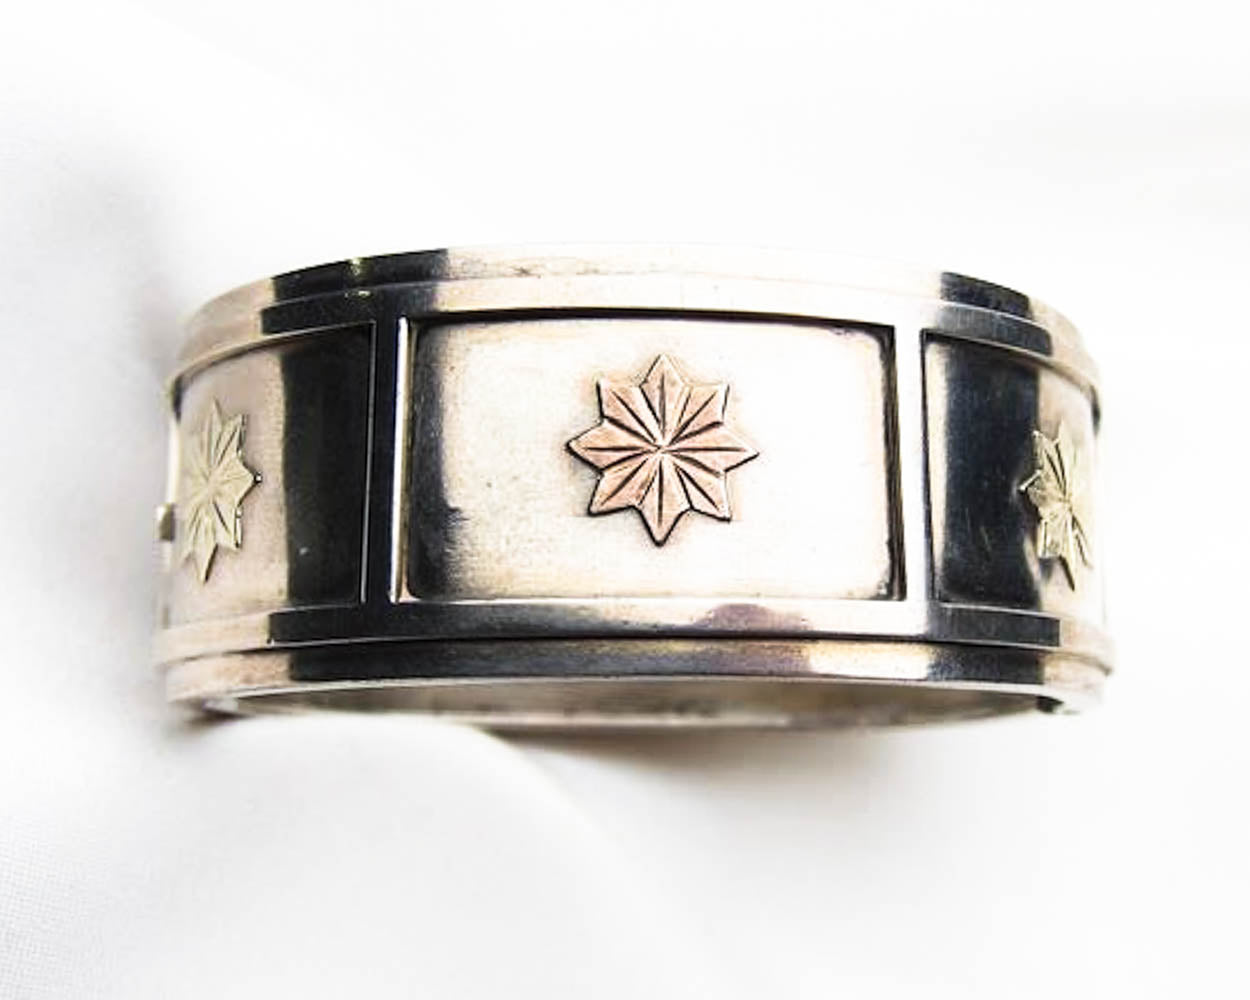 Victorian Silver Embossed Bangle